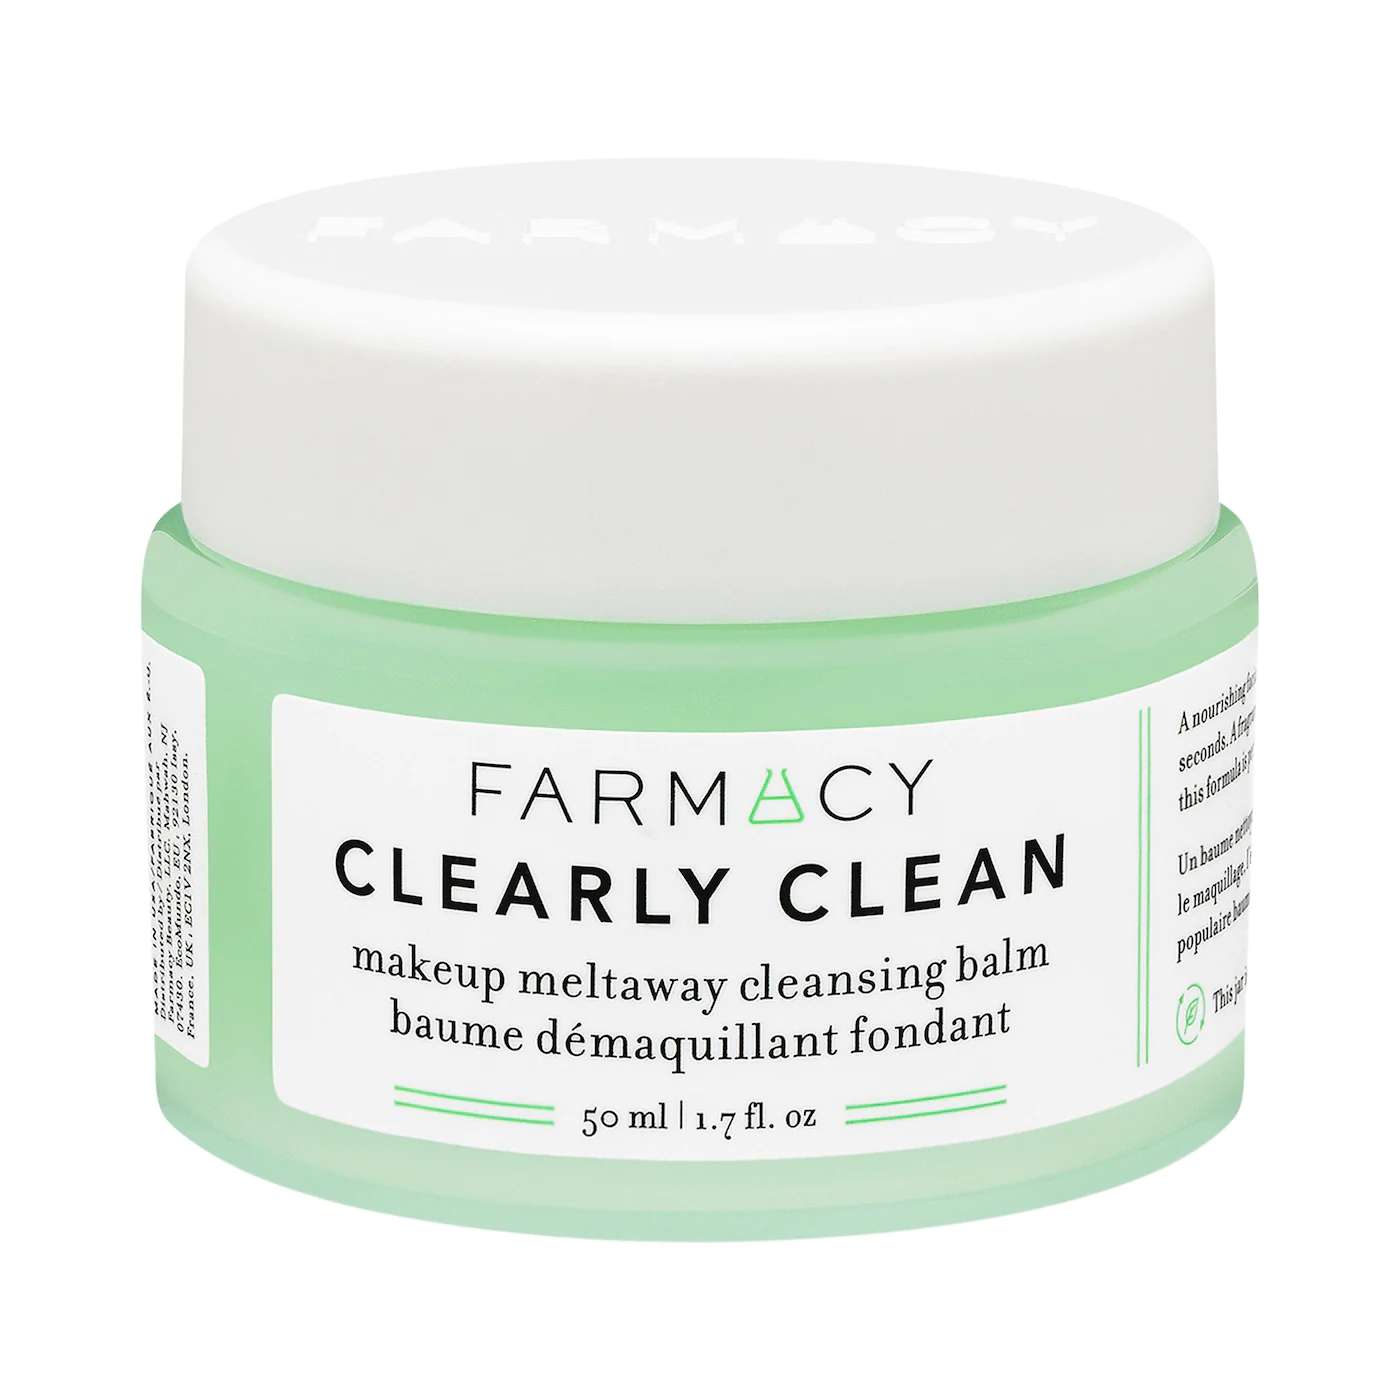 Mini Clearly Clean Makeup Removing Cleansing Balm 1.7 oz 50 mL